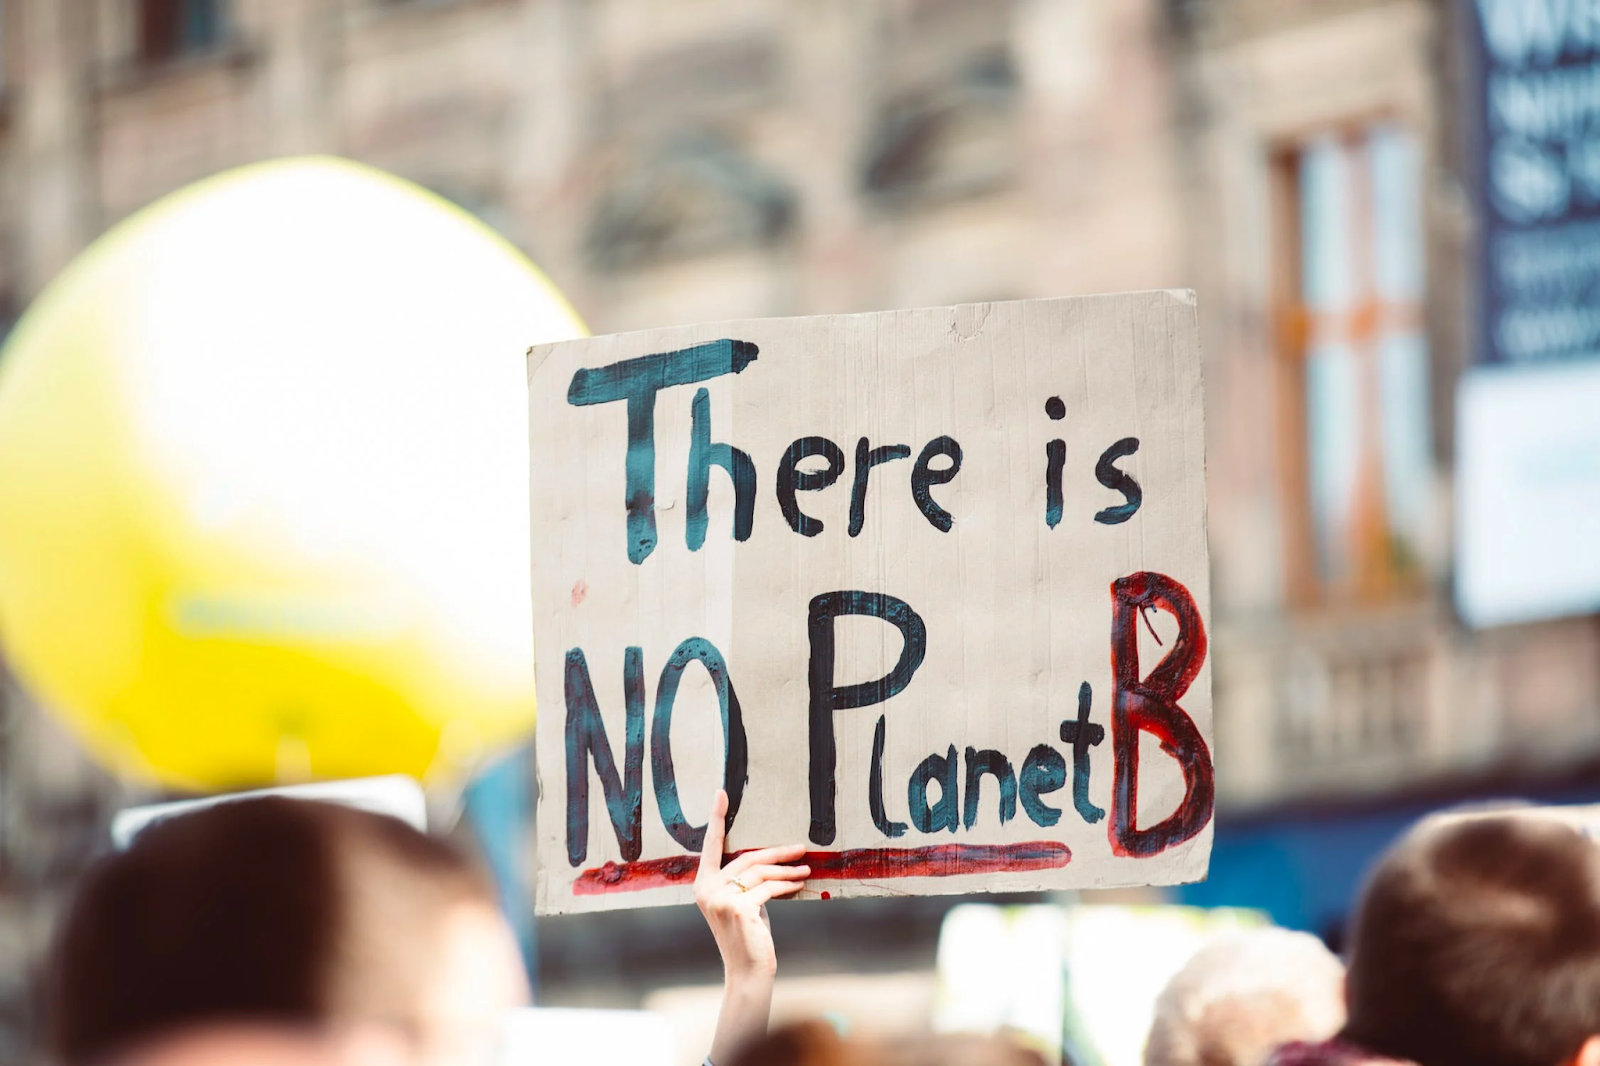 "there is no planet B" sign